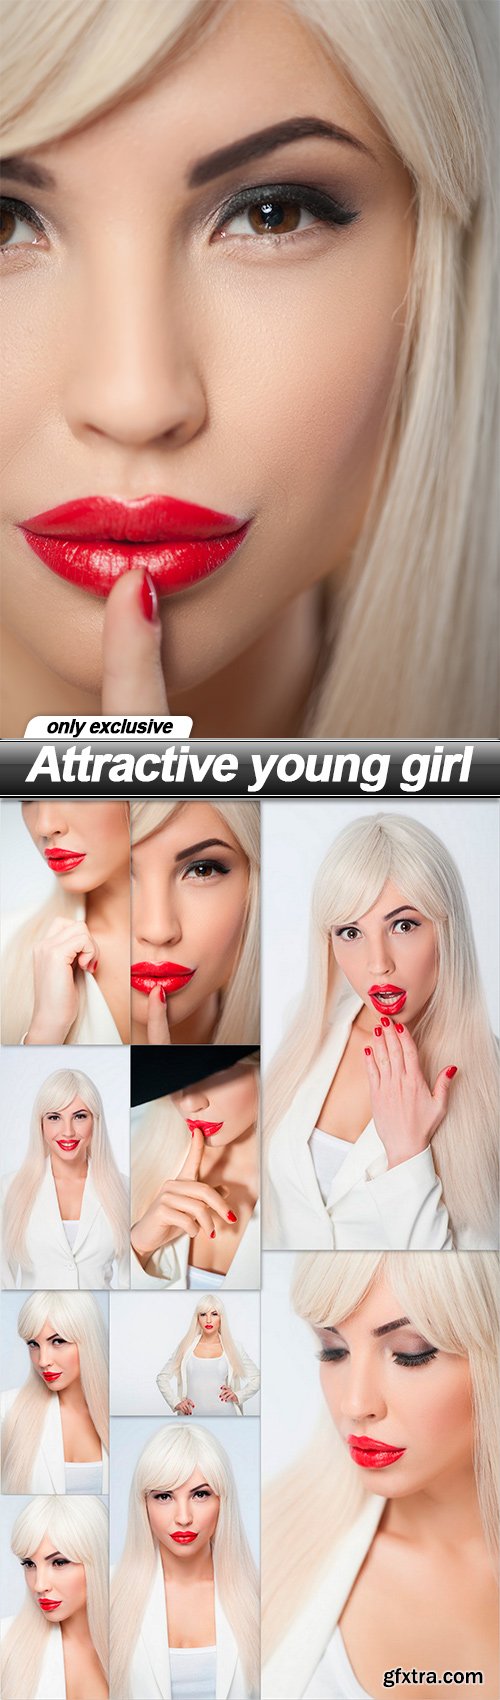 Attractive young girl - 10 UHQ JPEG